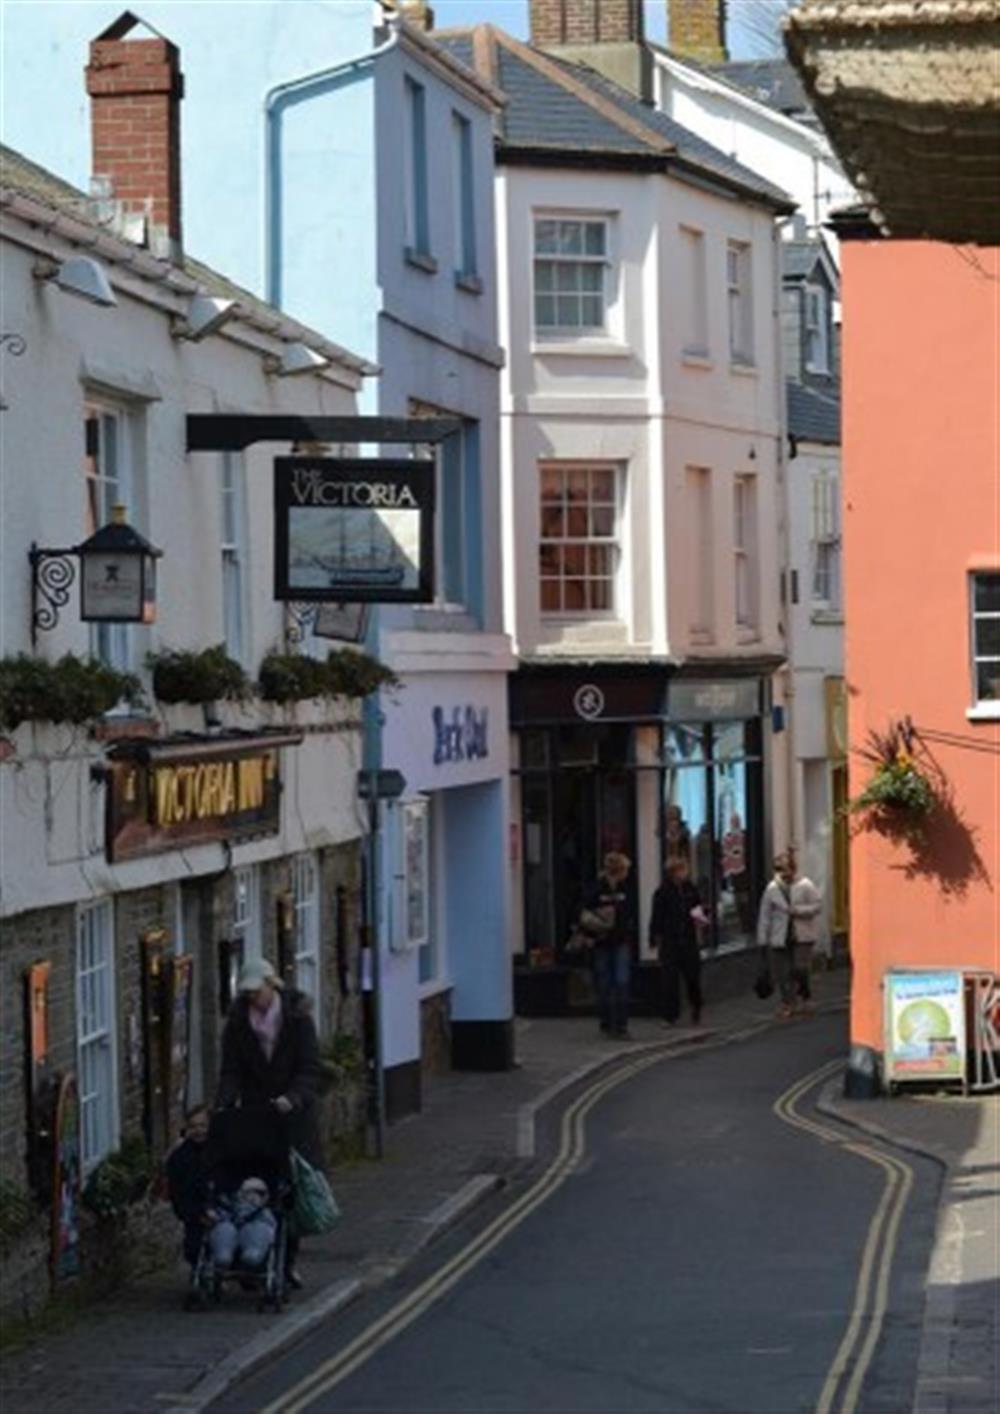 A great range of pubs, restaurants and shops within walking distance